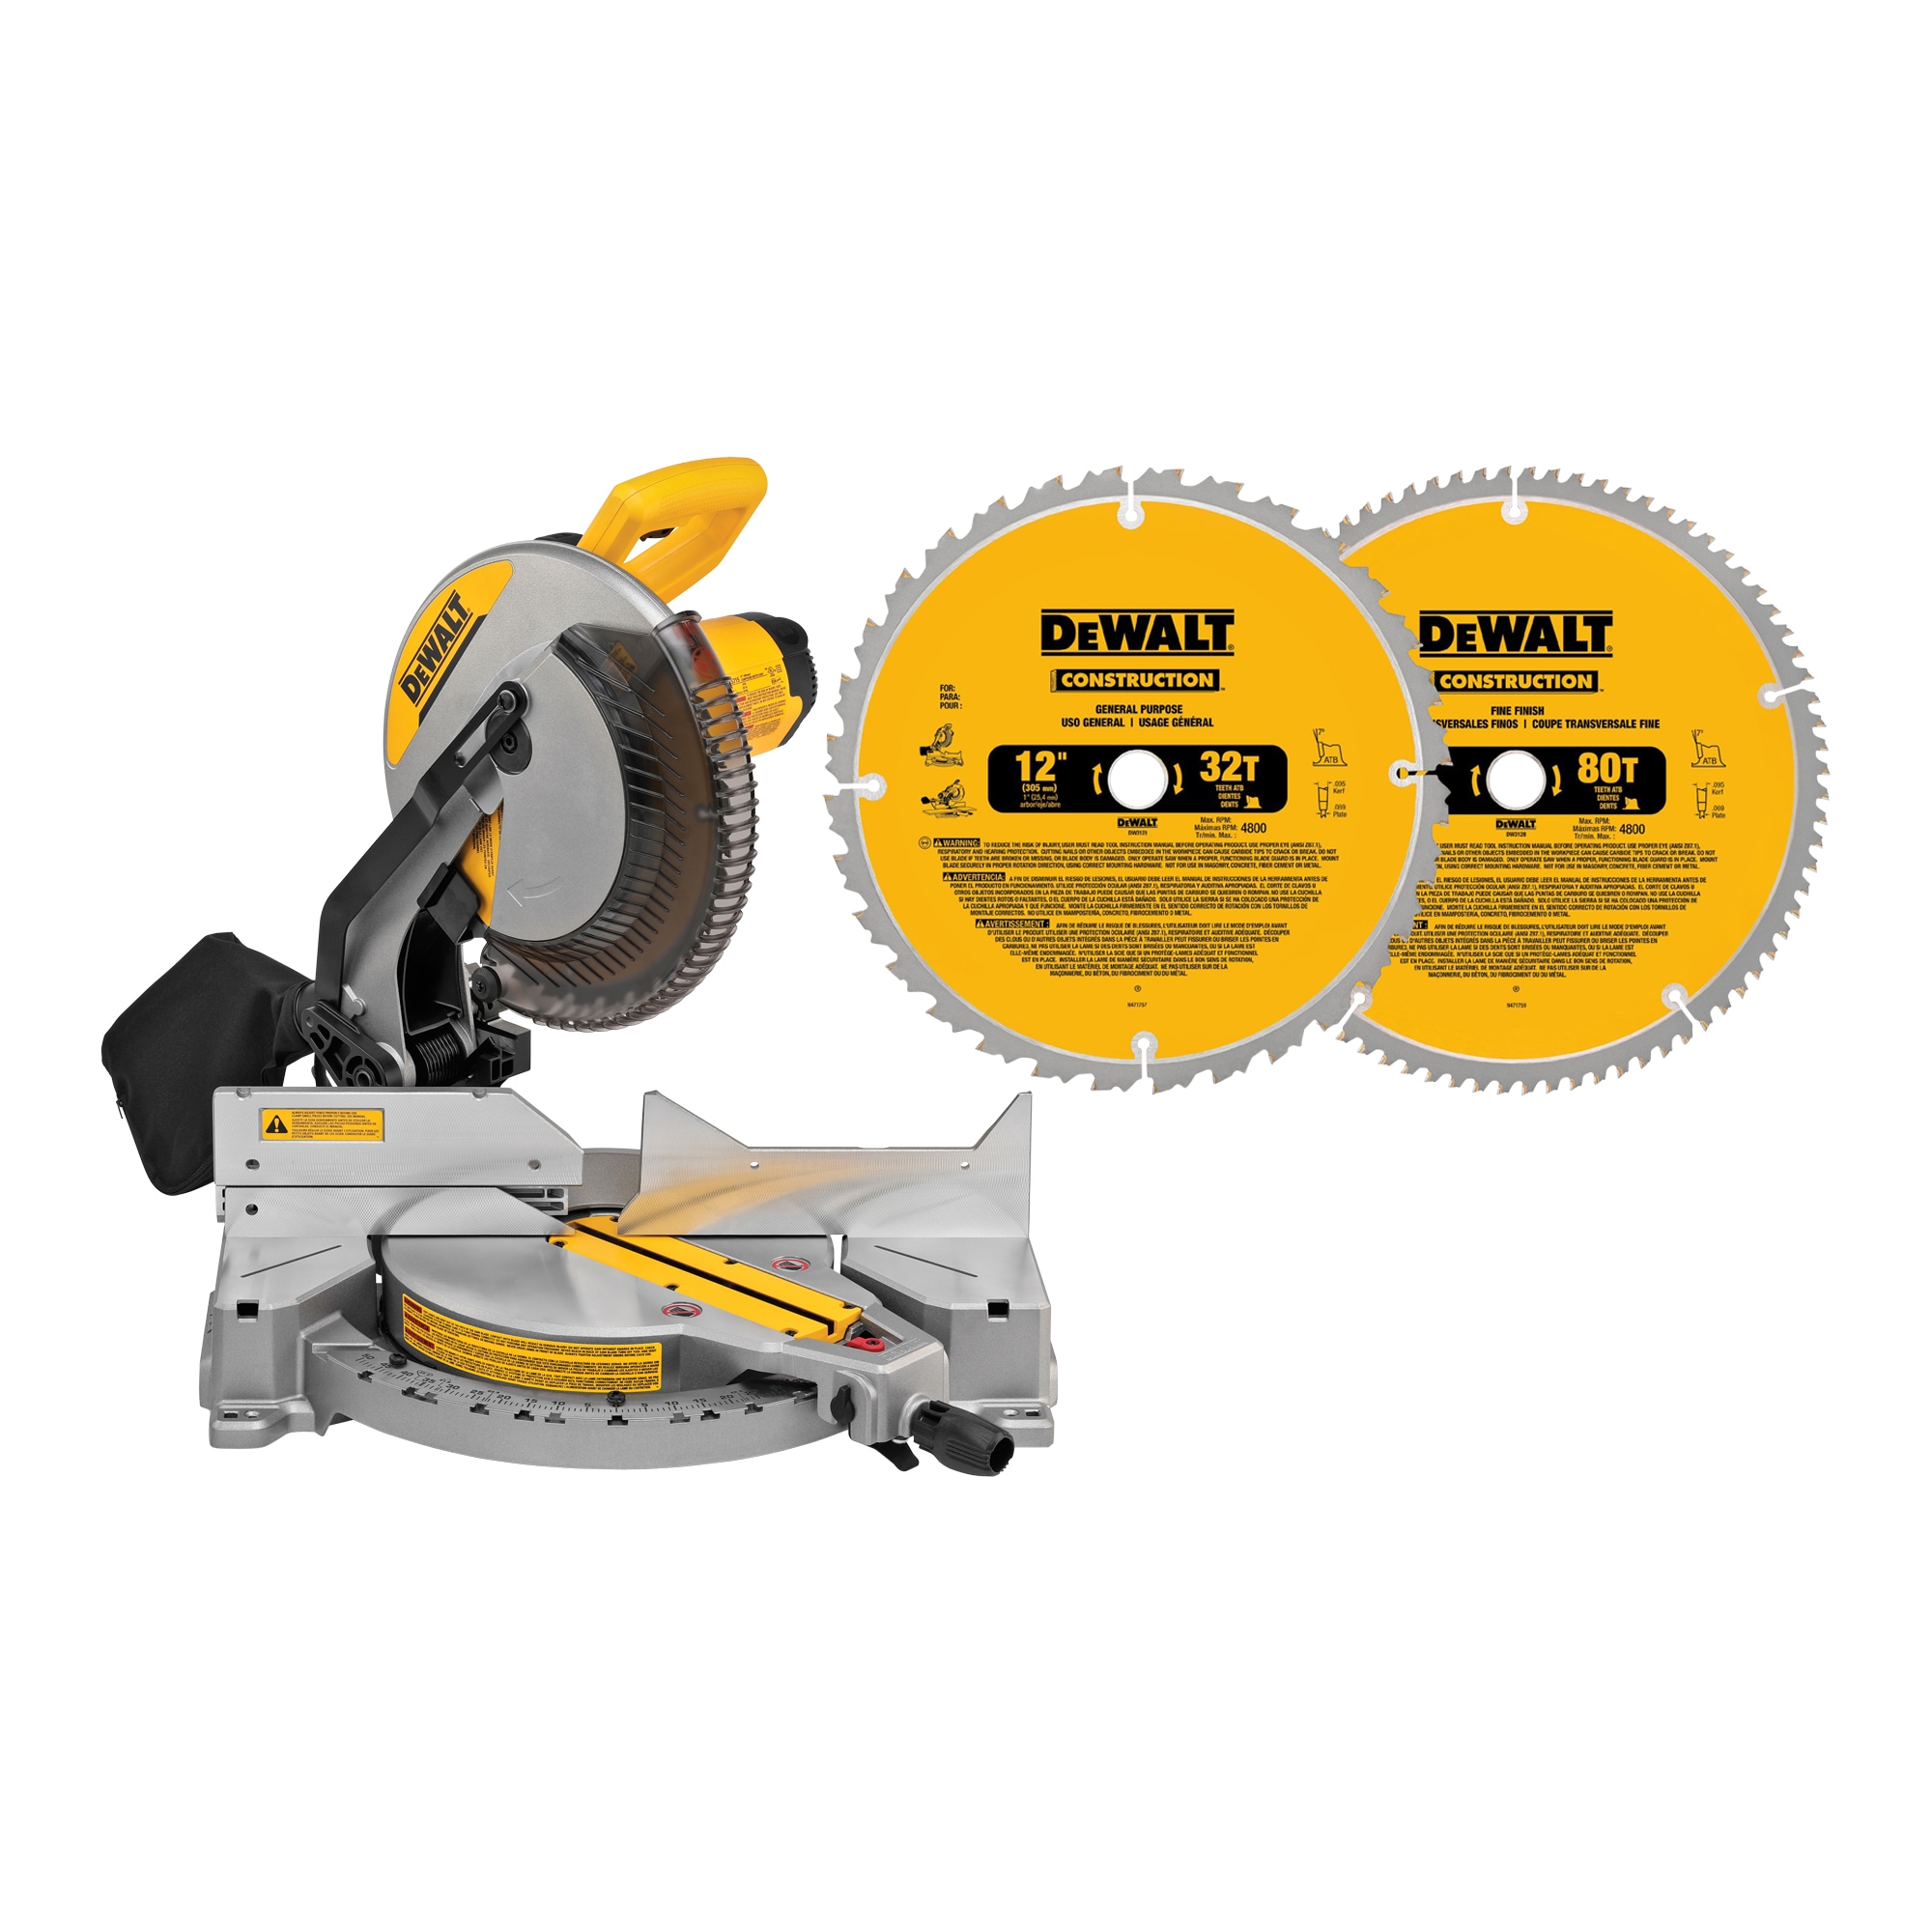 Læge absorption scene Shop DEWALT 12-in 15 Amps Single Bevel Compound Corded Miter Saw &  Construction 2-Pack 12-in 32 and 80-Tooth Carbide Miter/Table Saw Blade Set  at Lowes.com